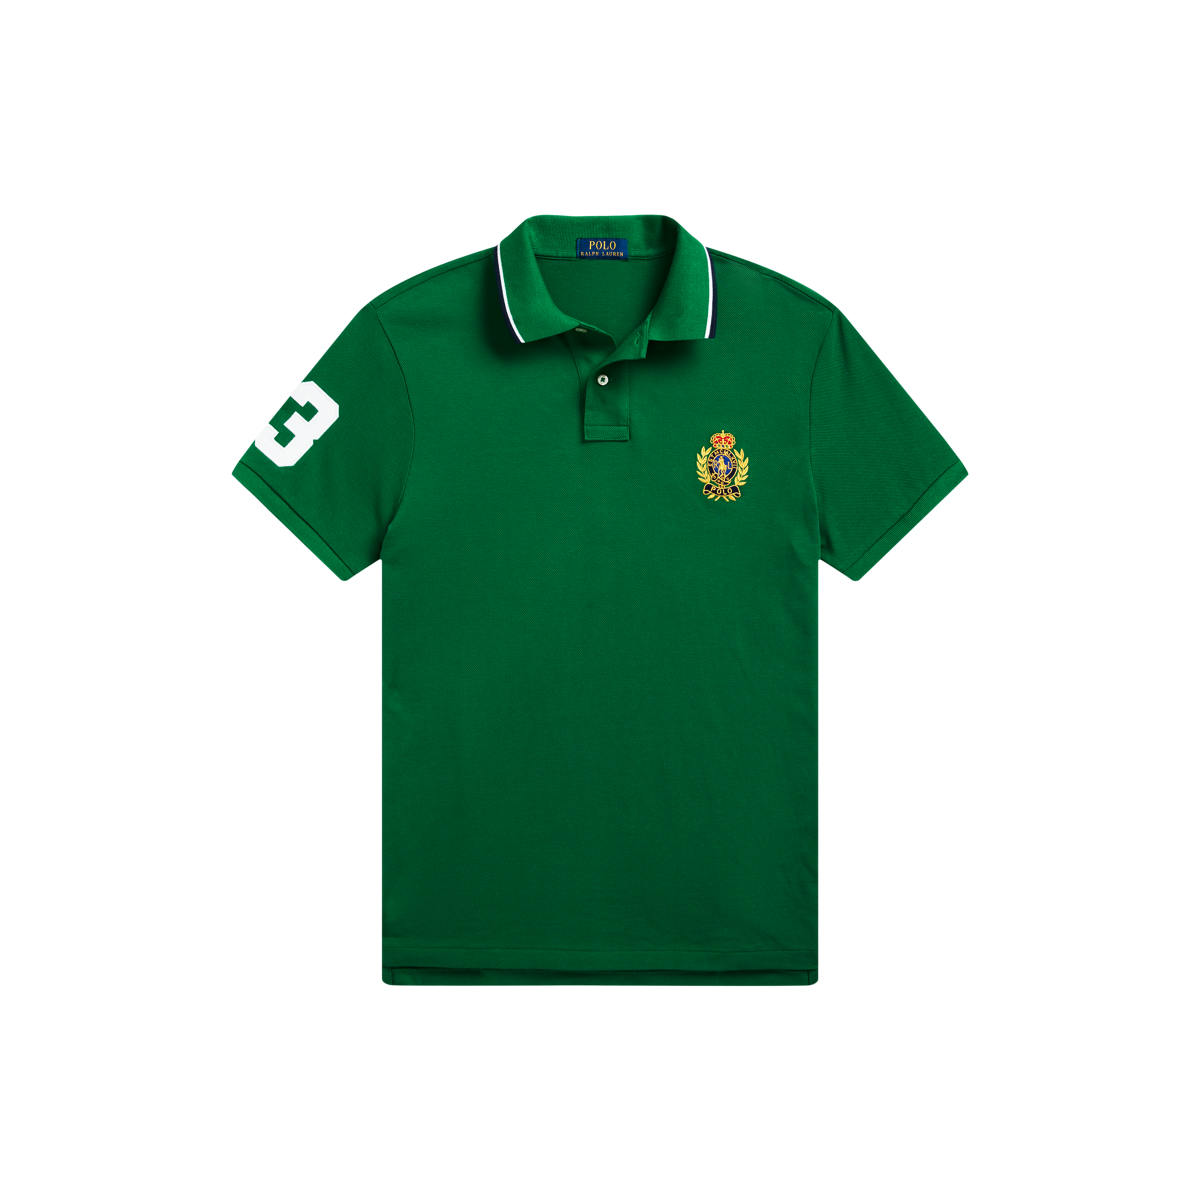 Classic Fit Polo Crest Mesh Polo Shirt